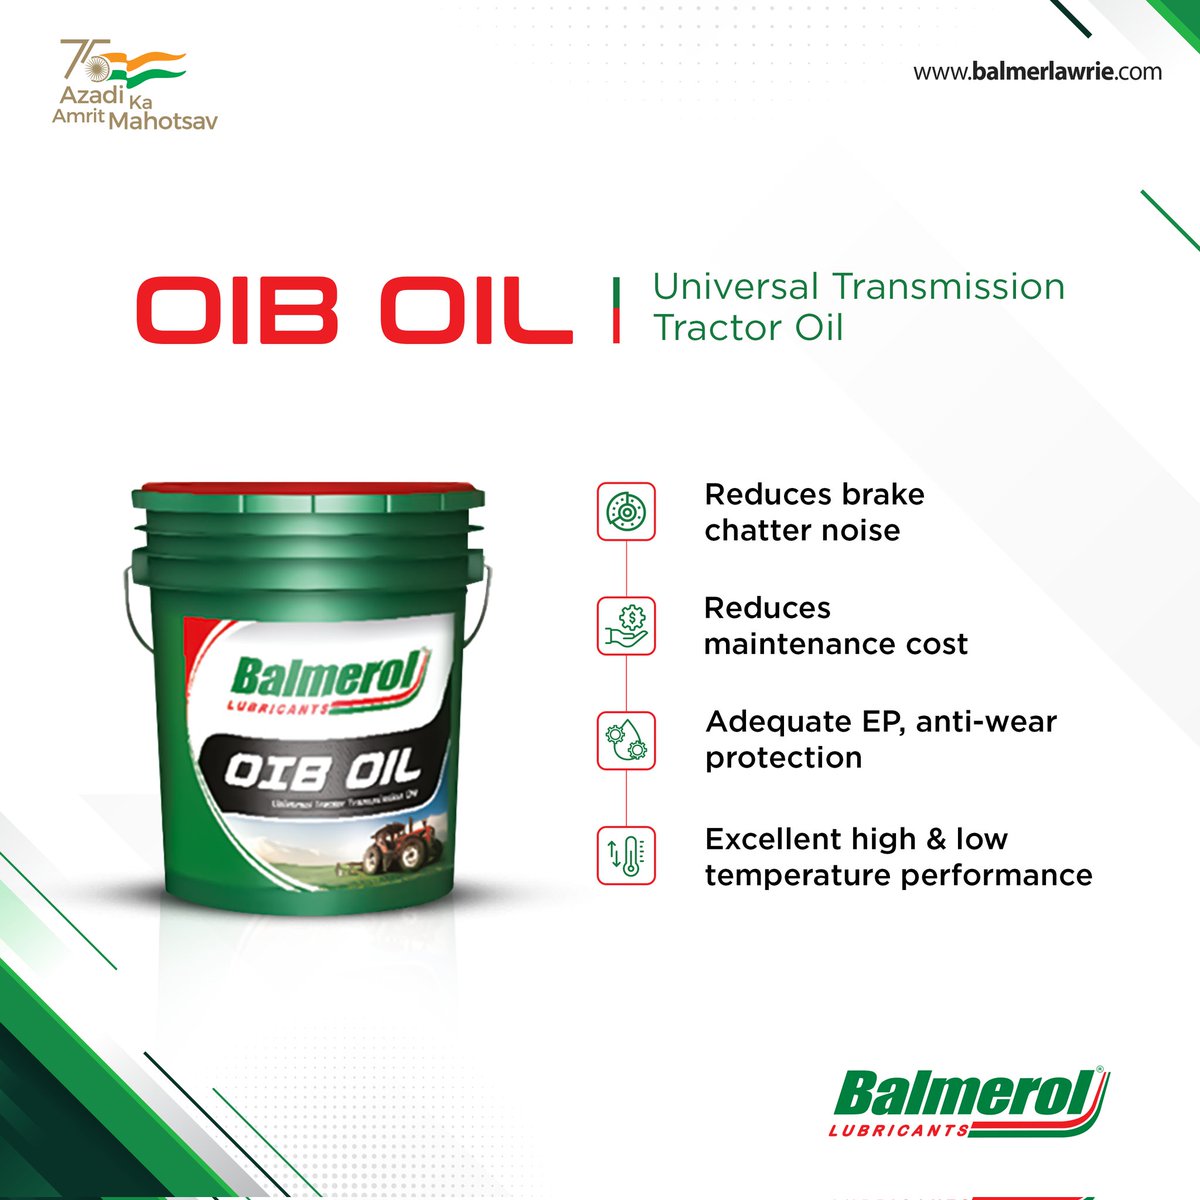 Our OIB oil is specially formulated to provide the following benefits:

- Noise-free operations in wet disk brake tractors
- Smooth movement as it lubricates pumps & bearings gears,
- A prominent heat transfer medium for wet brakes

#balmerol #oib #tractors #transmissionoil